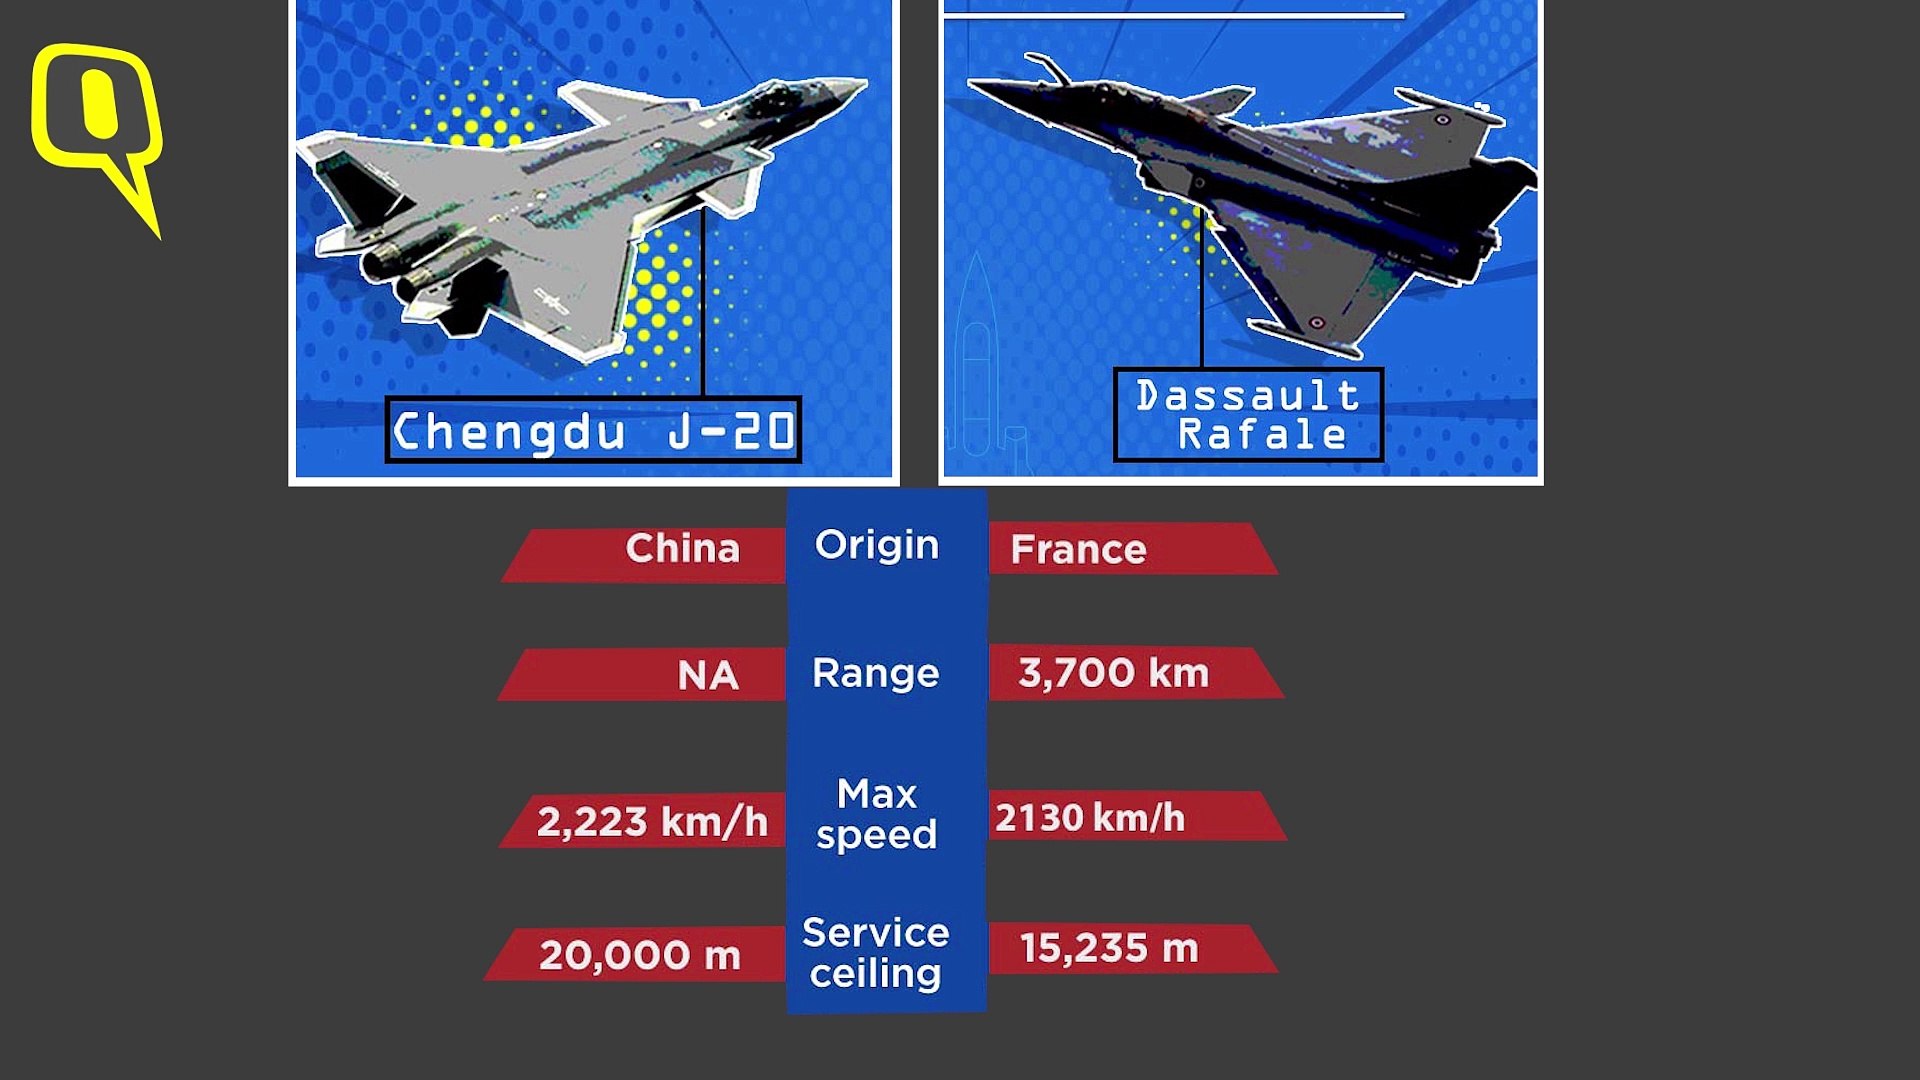 India S Rafale Vs China S J Which Is The Better Fighter Plane Video Dailymotion